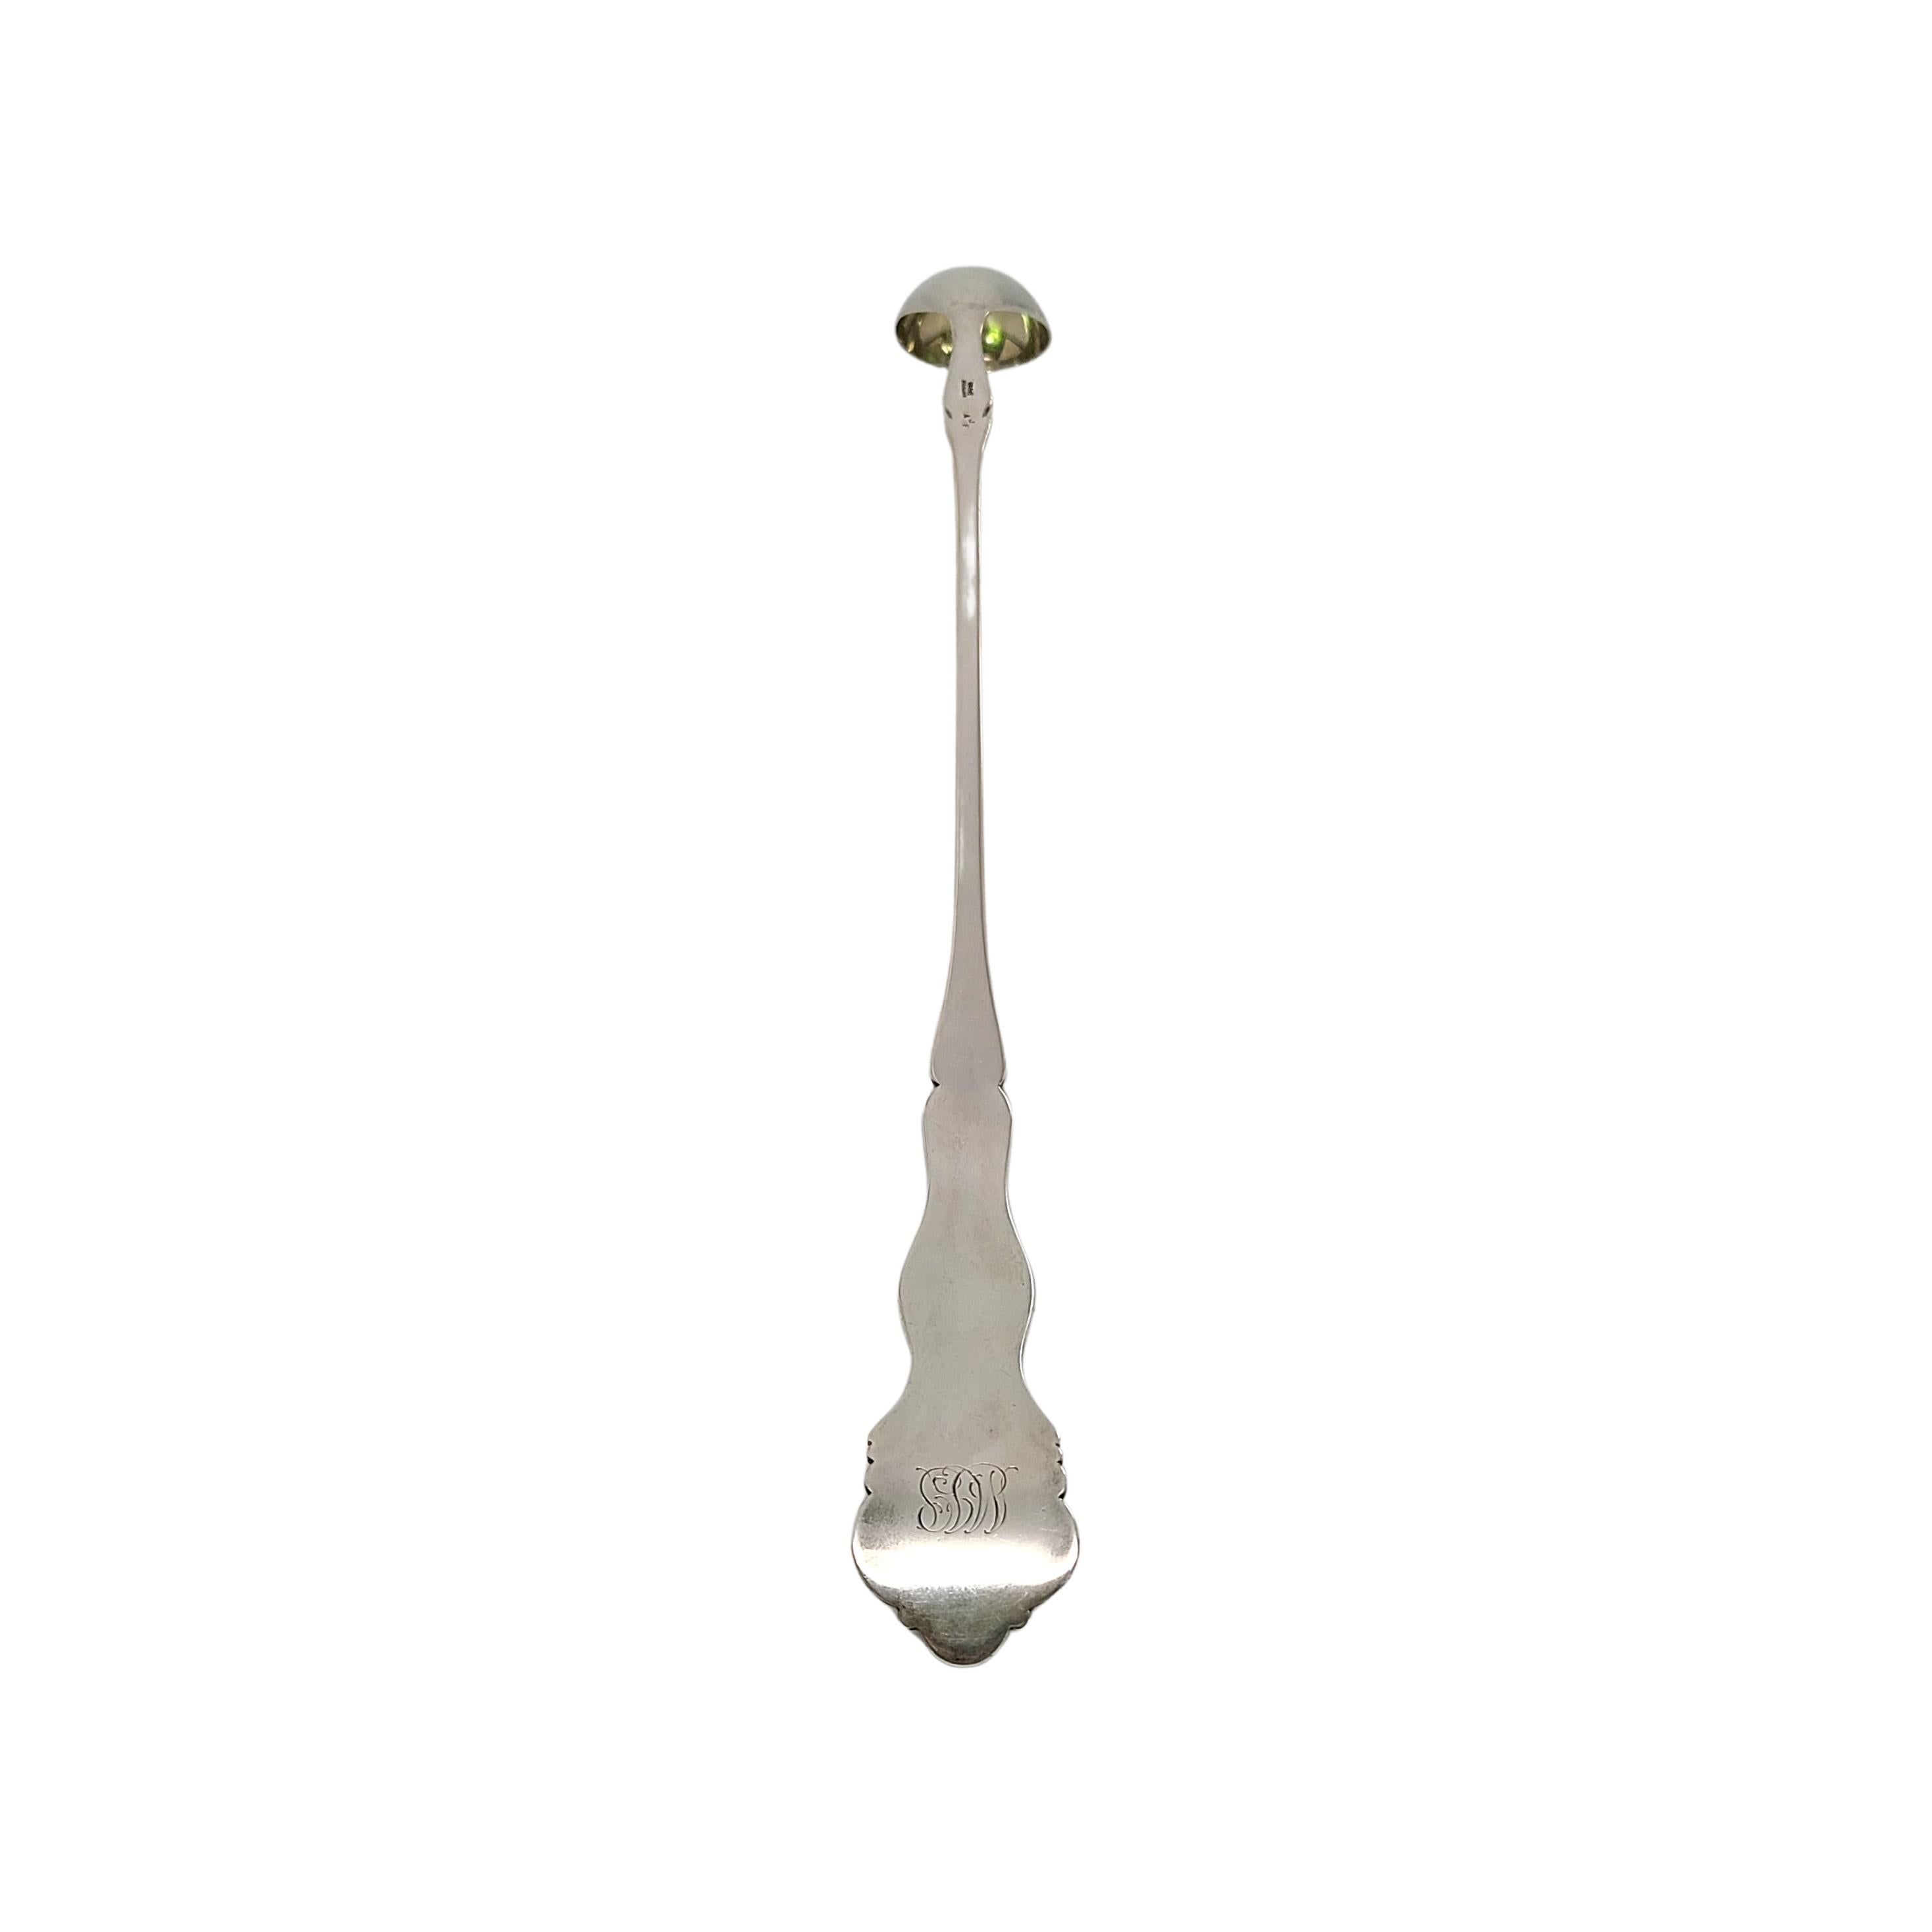 
Sterling silver with gold washed bowl claret ladle by Gorham in a Grapevine pattern.

Monogram appears to be MJP

This long ladle with a small bowl was used to scoop fruit out of a pitcher. It features a gold wash on the inside of the bowl with